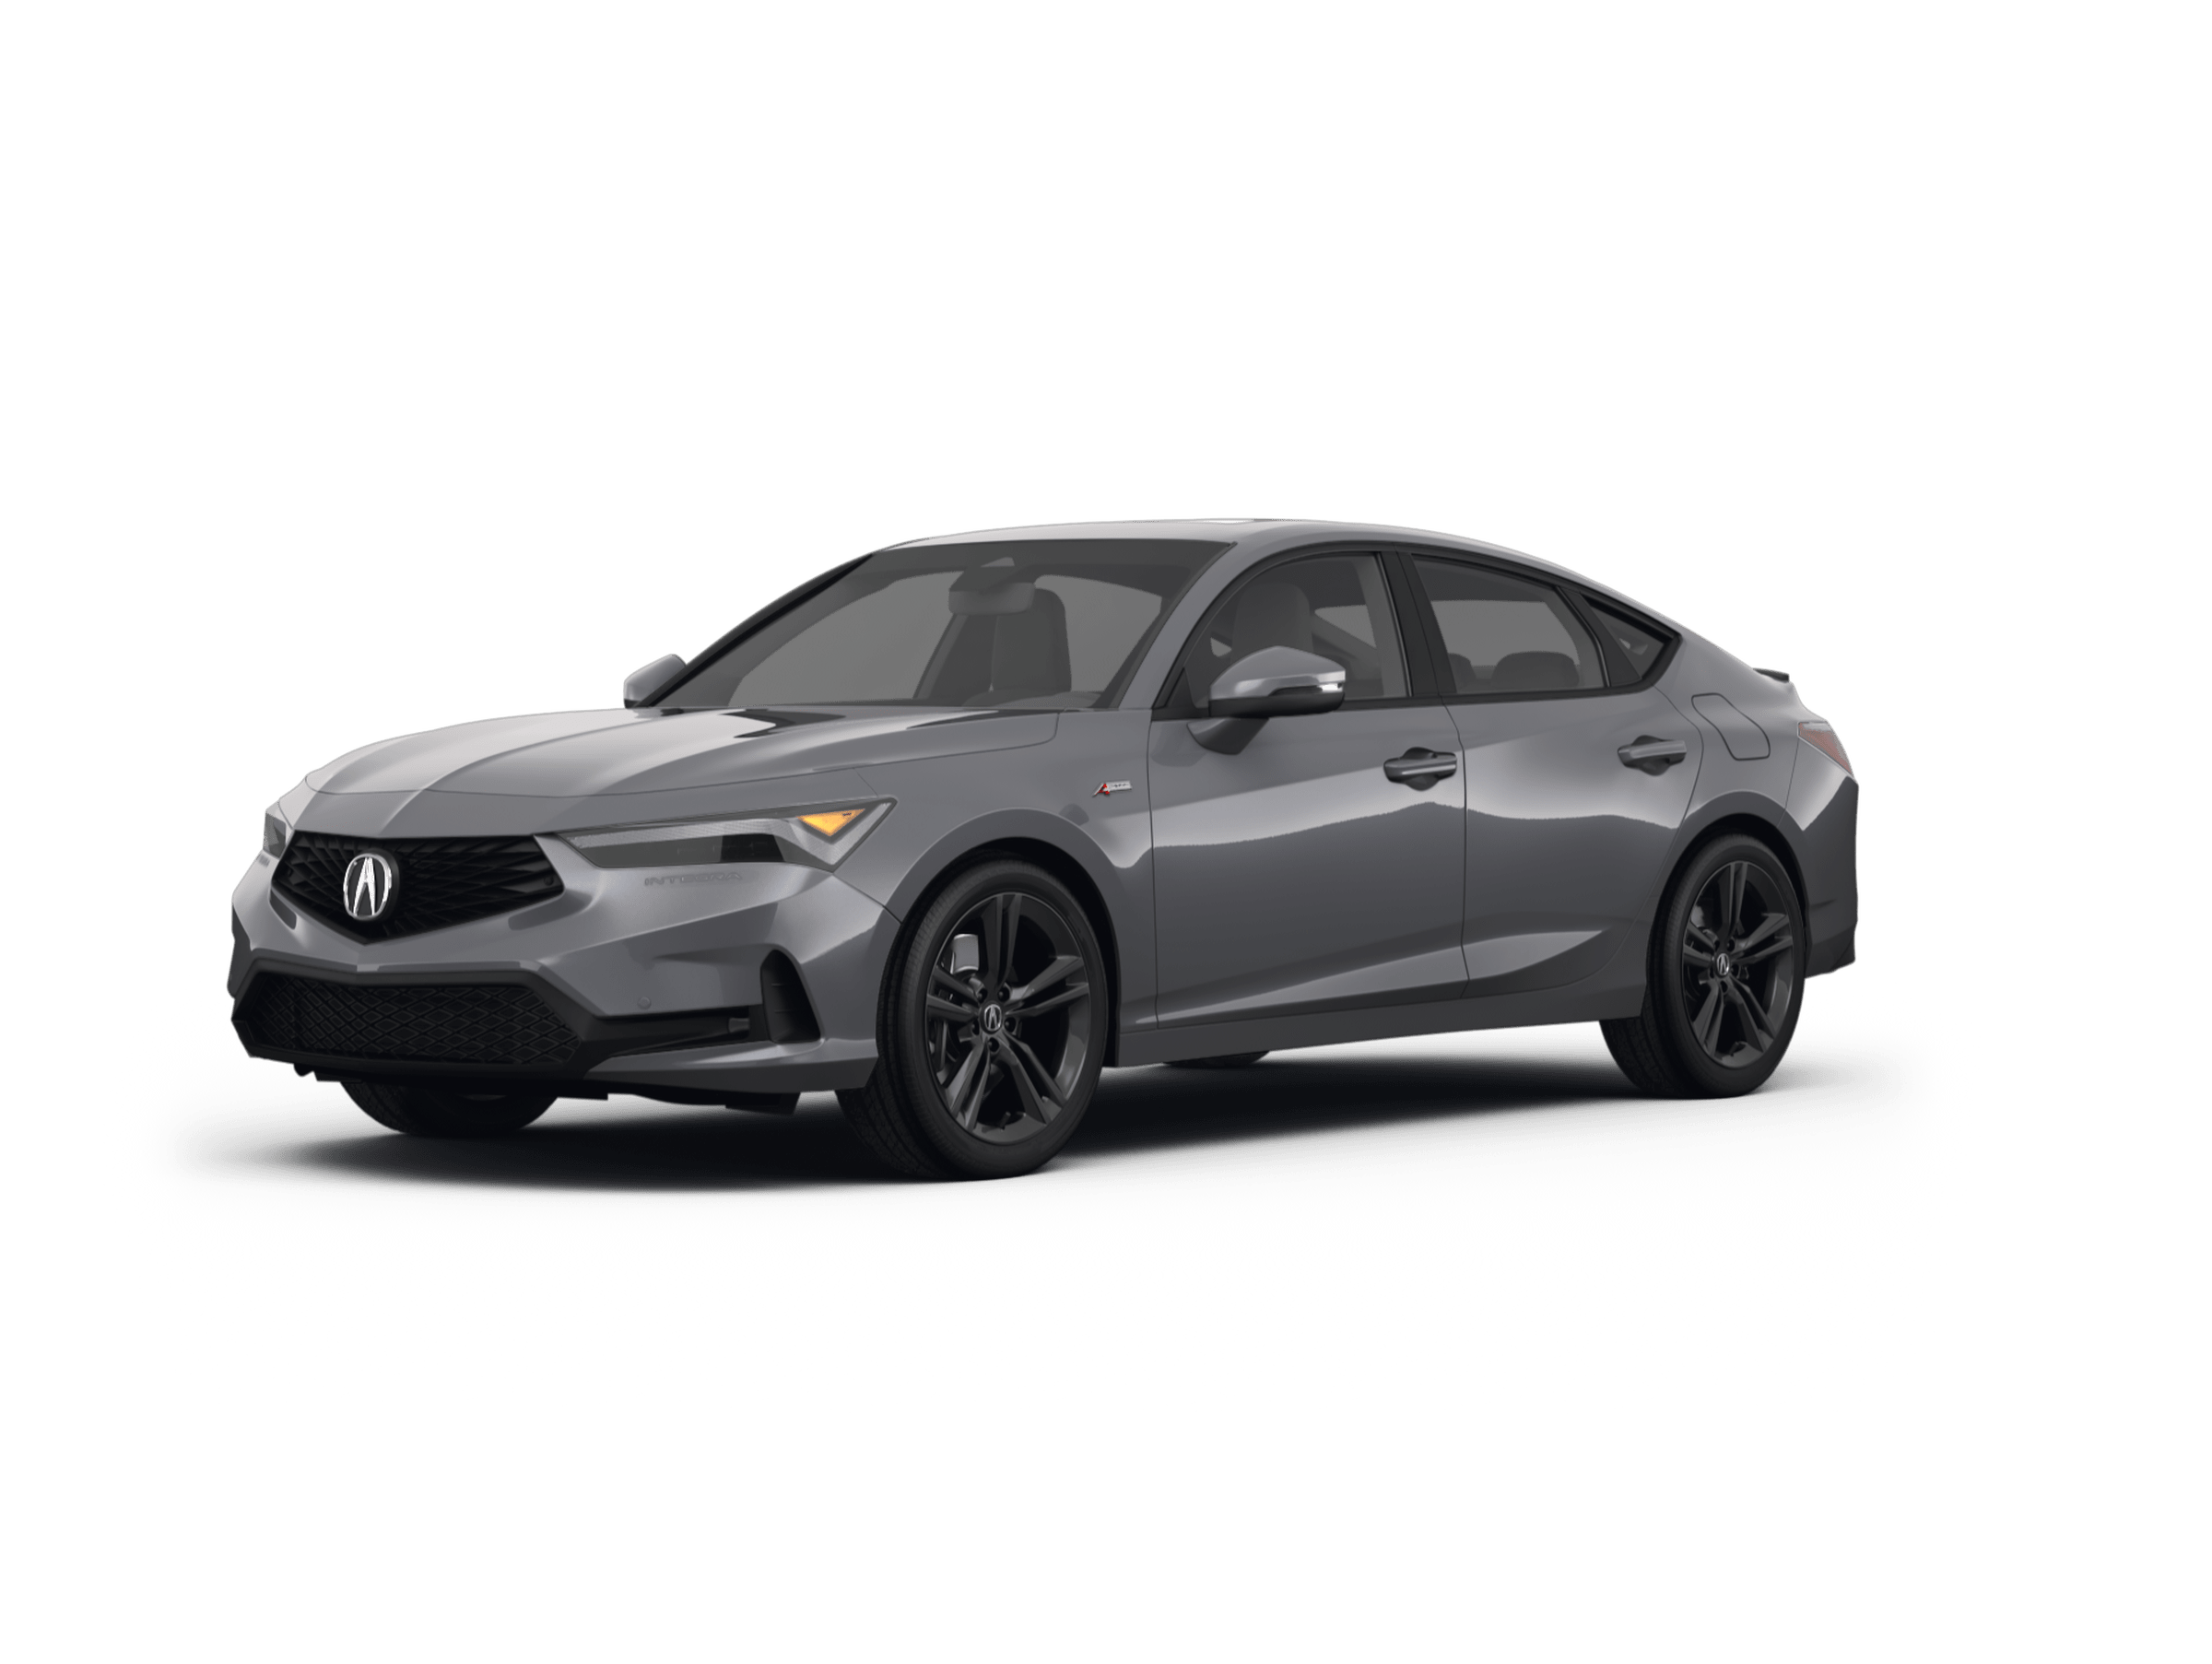 New and Used Acura Car Listings, Search Acura Car Inventory for 